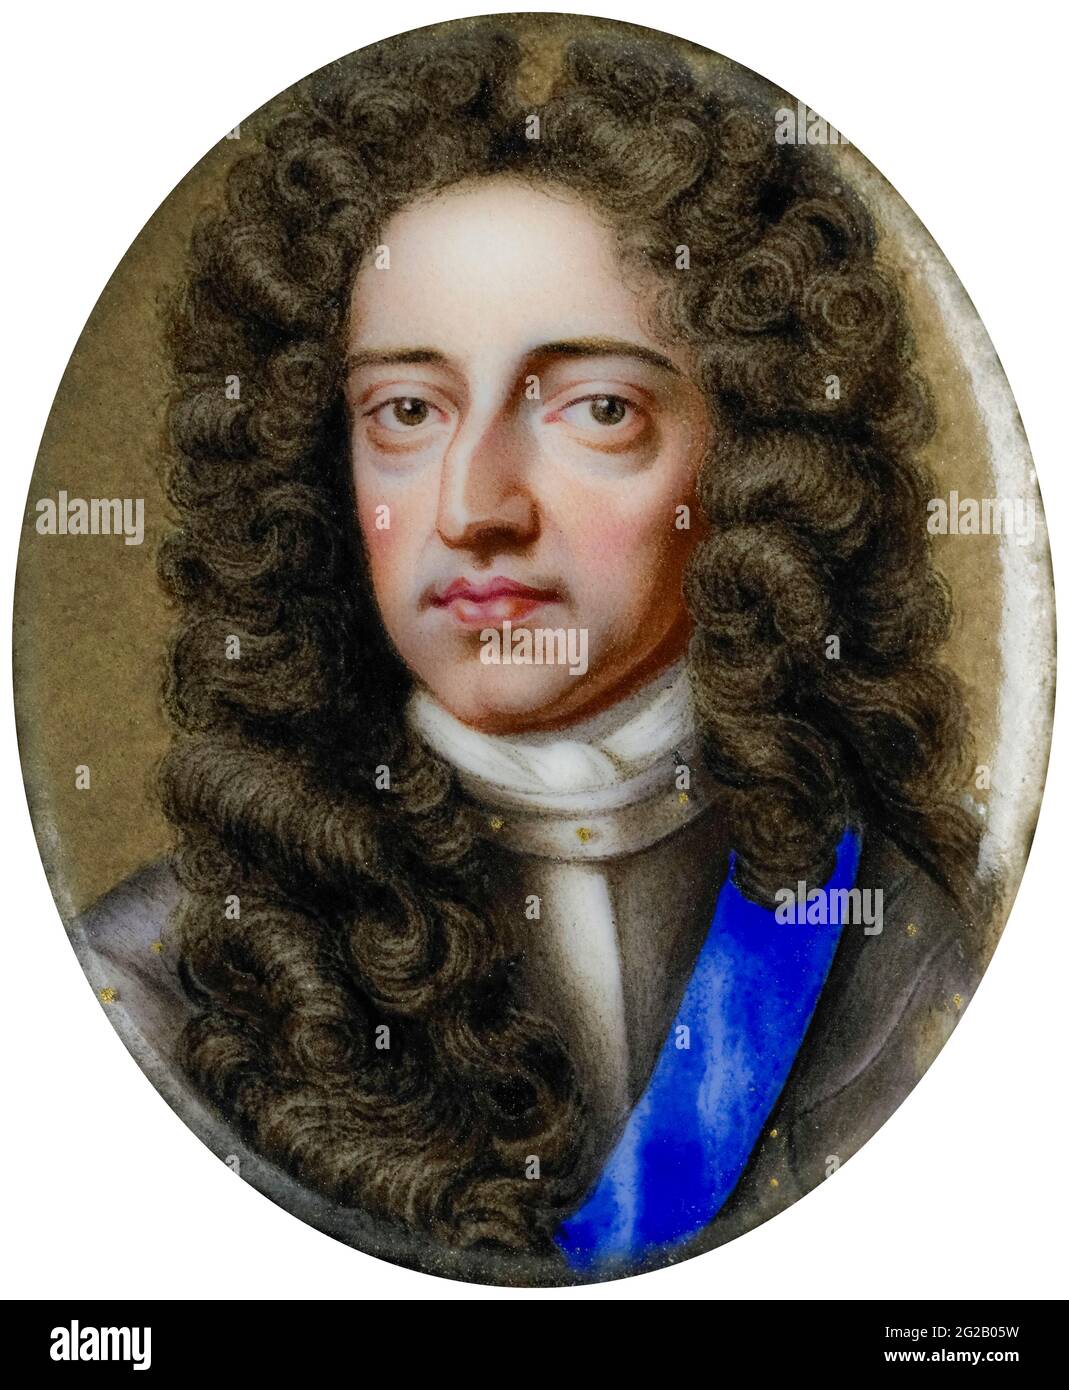 William III (1650-1702) Prince of Orange and King of England (1689-1702), portrait miniature by Charles Boit after Kneller, 1690-1727 Stock Photo